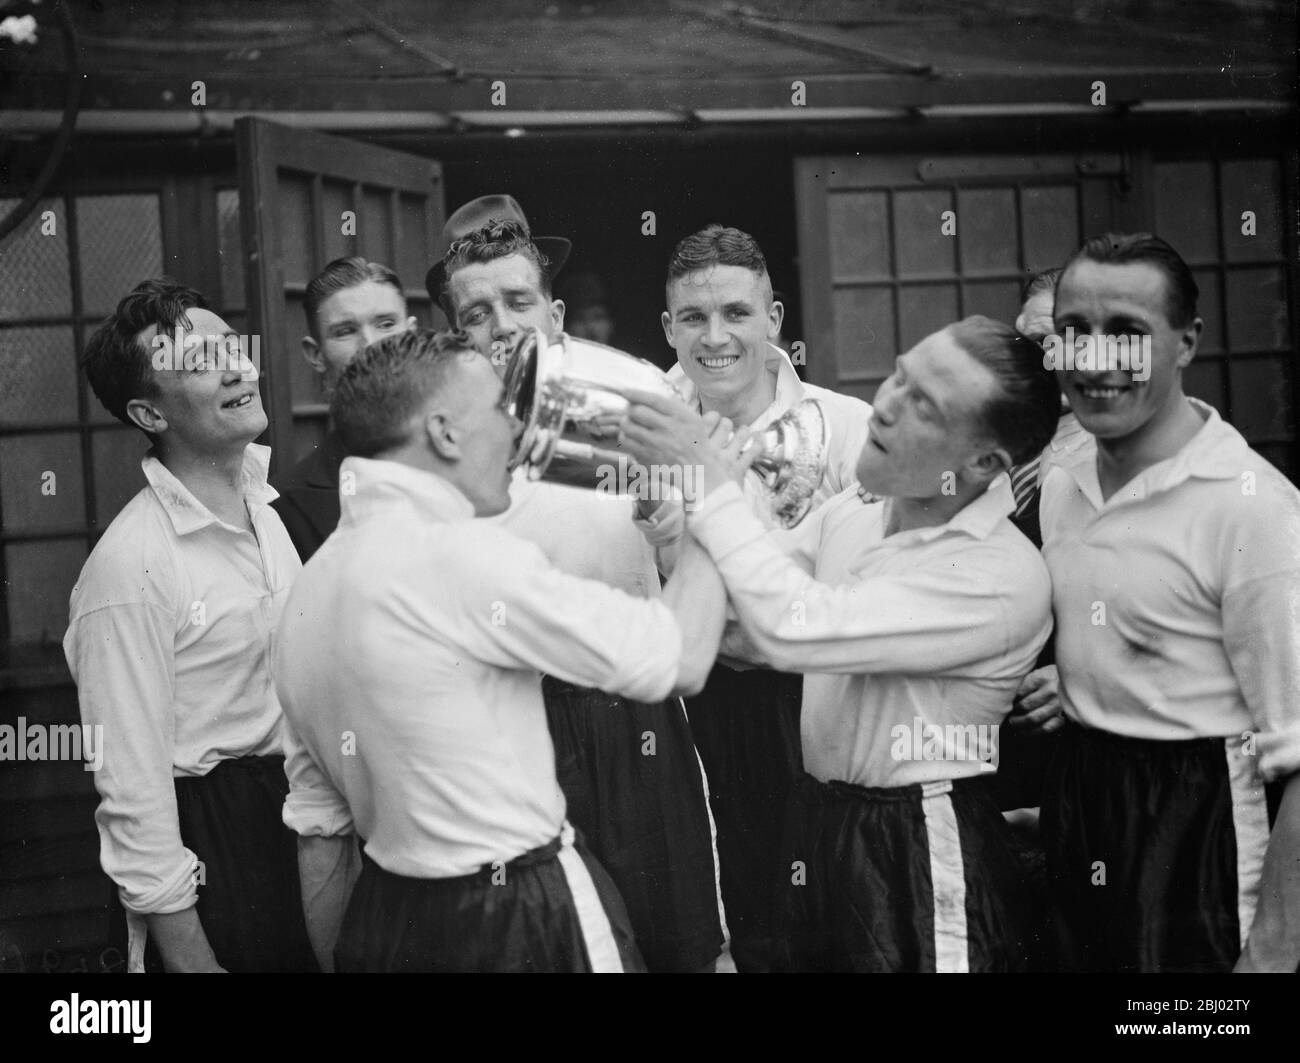 Bromley football club versus Belvedere football club in the FA Amateur Cup Final at Millwall football club stadium the The Den in South Bermondsey, London . - Bromley the winning team hold the cup aloft . - 1938 Stock Photo